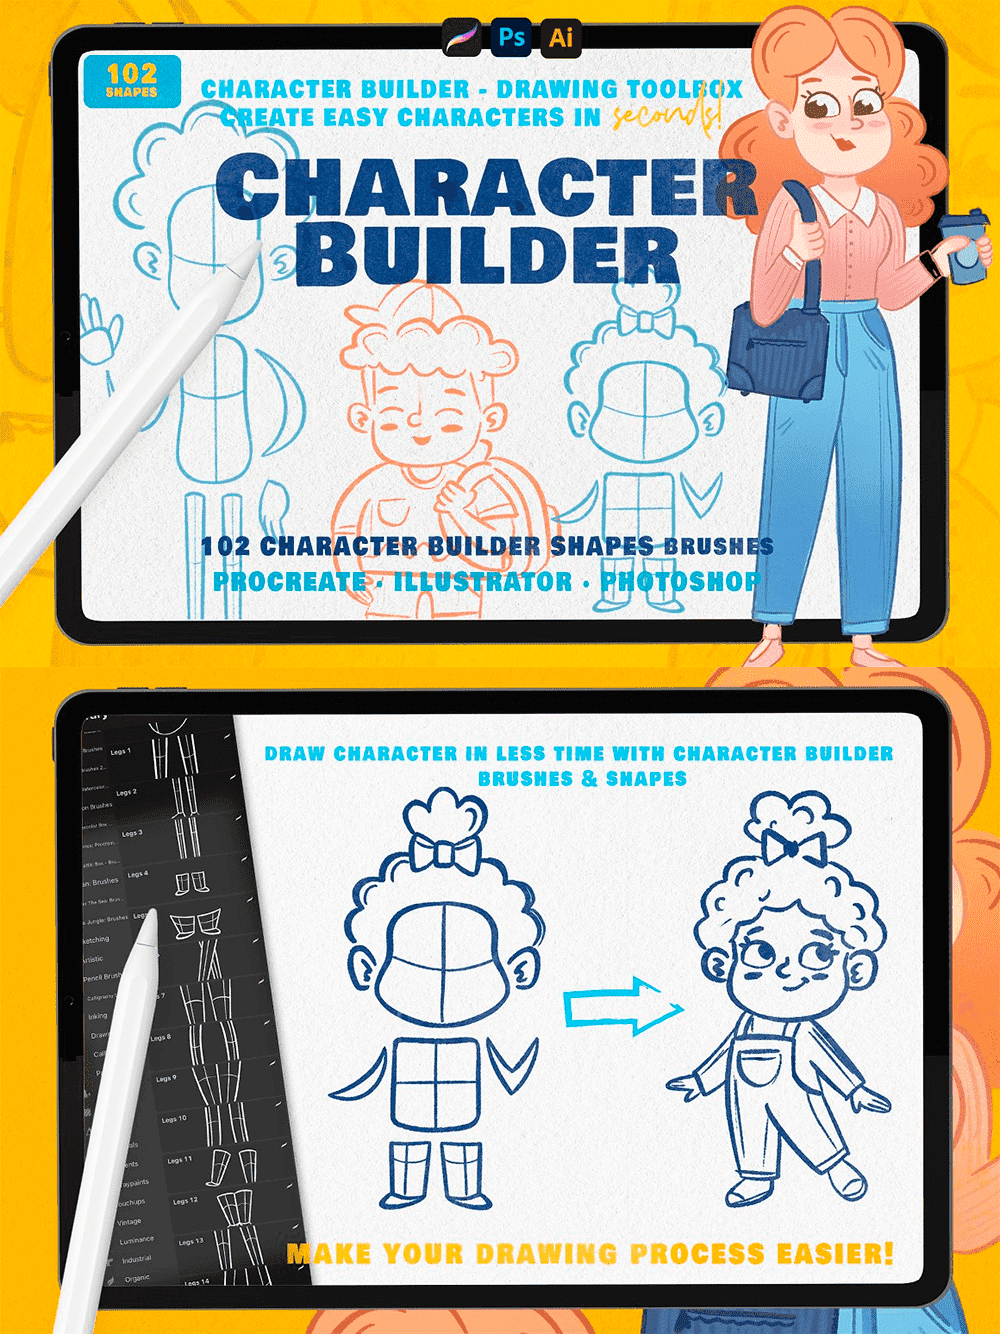 Character builder drawing toolkit, picture for pinterest.